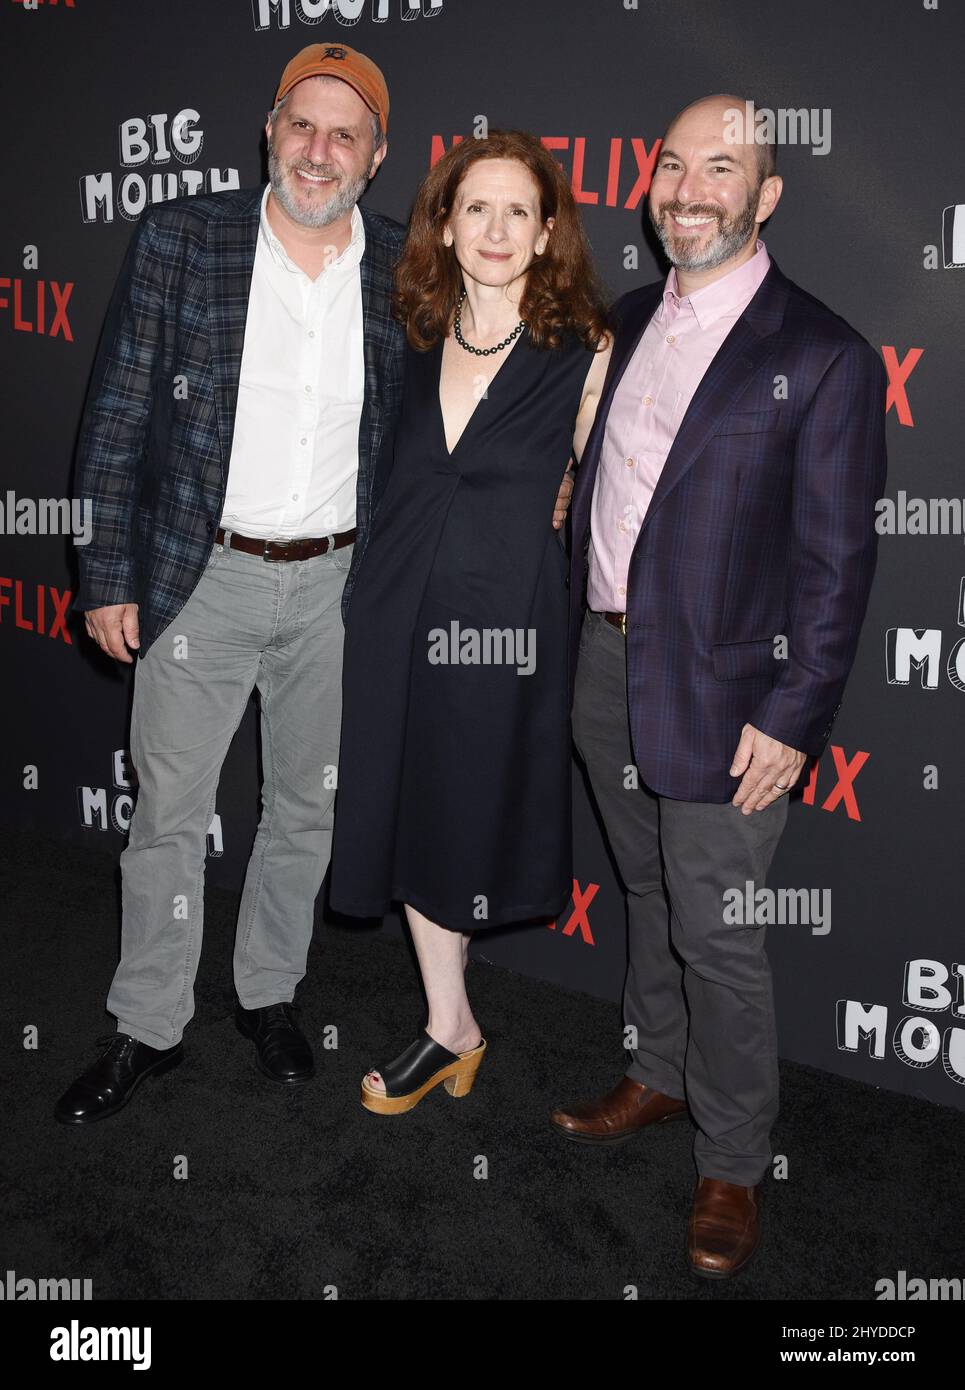 Mark Levin, Jen Flackett and Andrew Goldberg 'Big Mouth' Premiere Party held at the Line Hotel Stock Photo